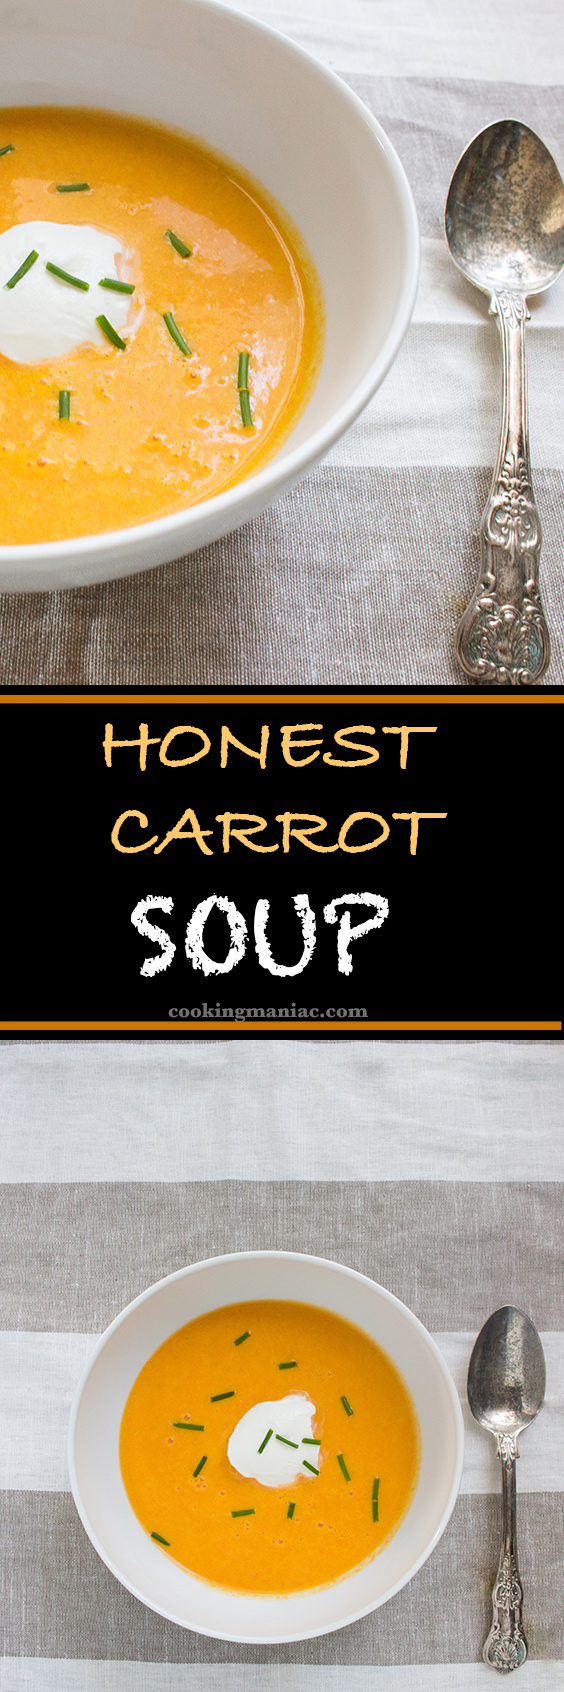 Honest Carrot Ginger Soup- A bowl of this flavorful honest carrot ginger soup can give your mood and energy the lift it needs.